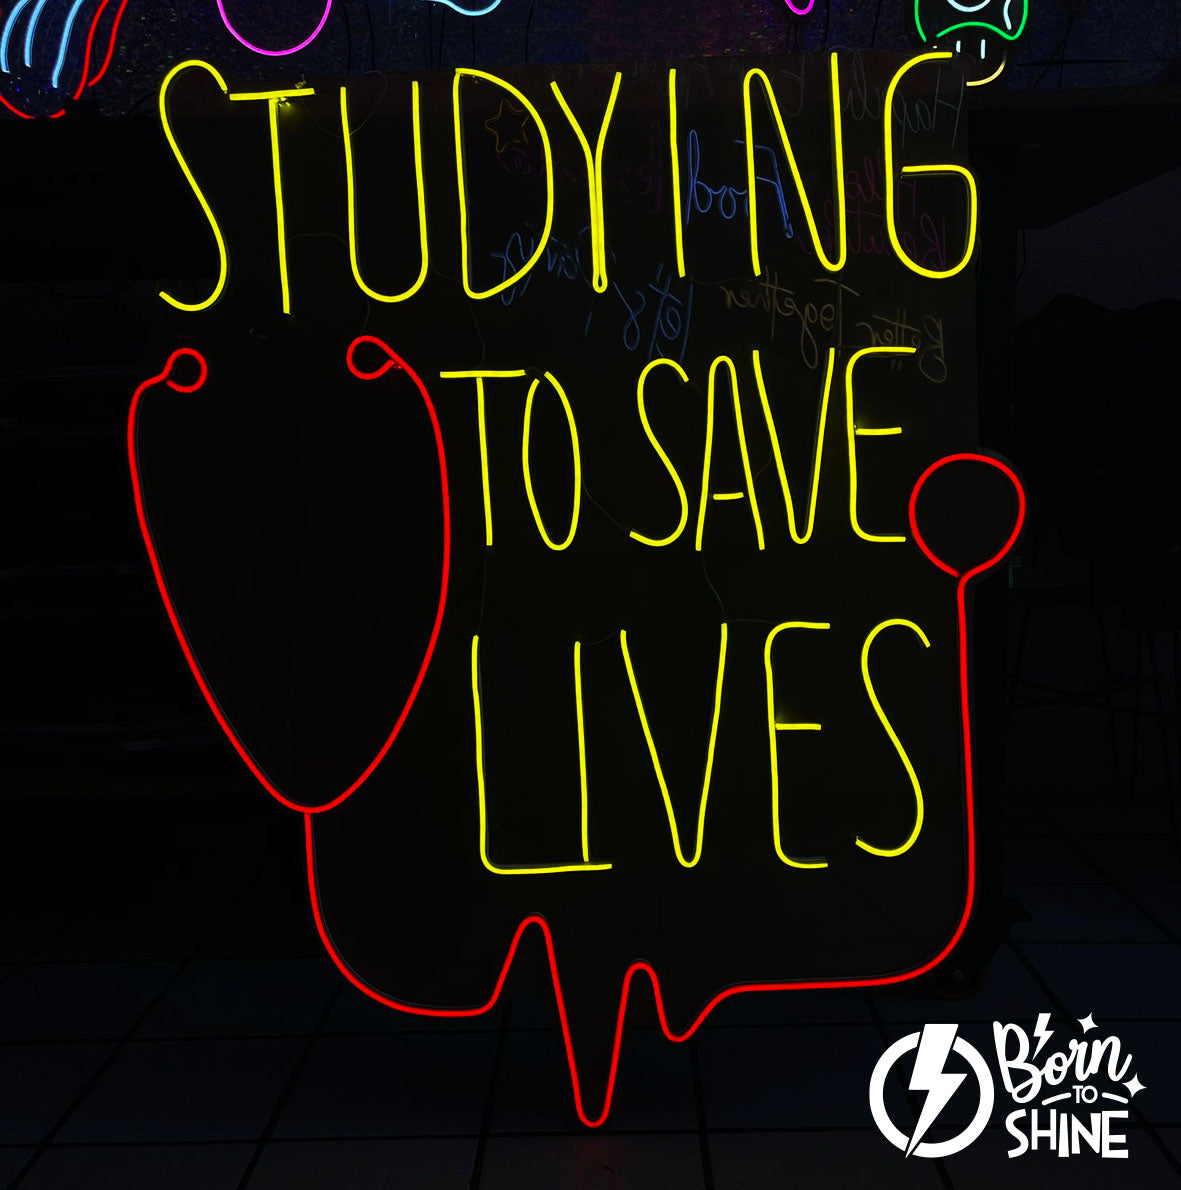 Studying to save lives